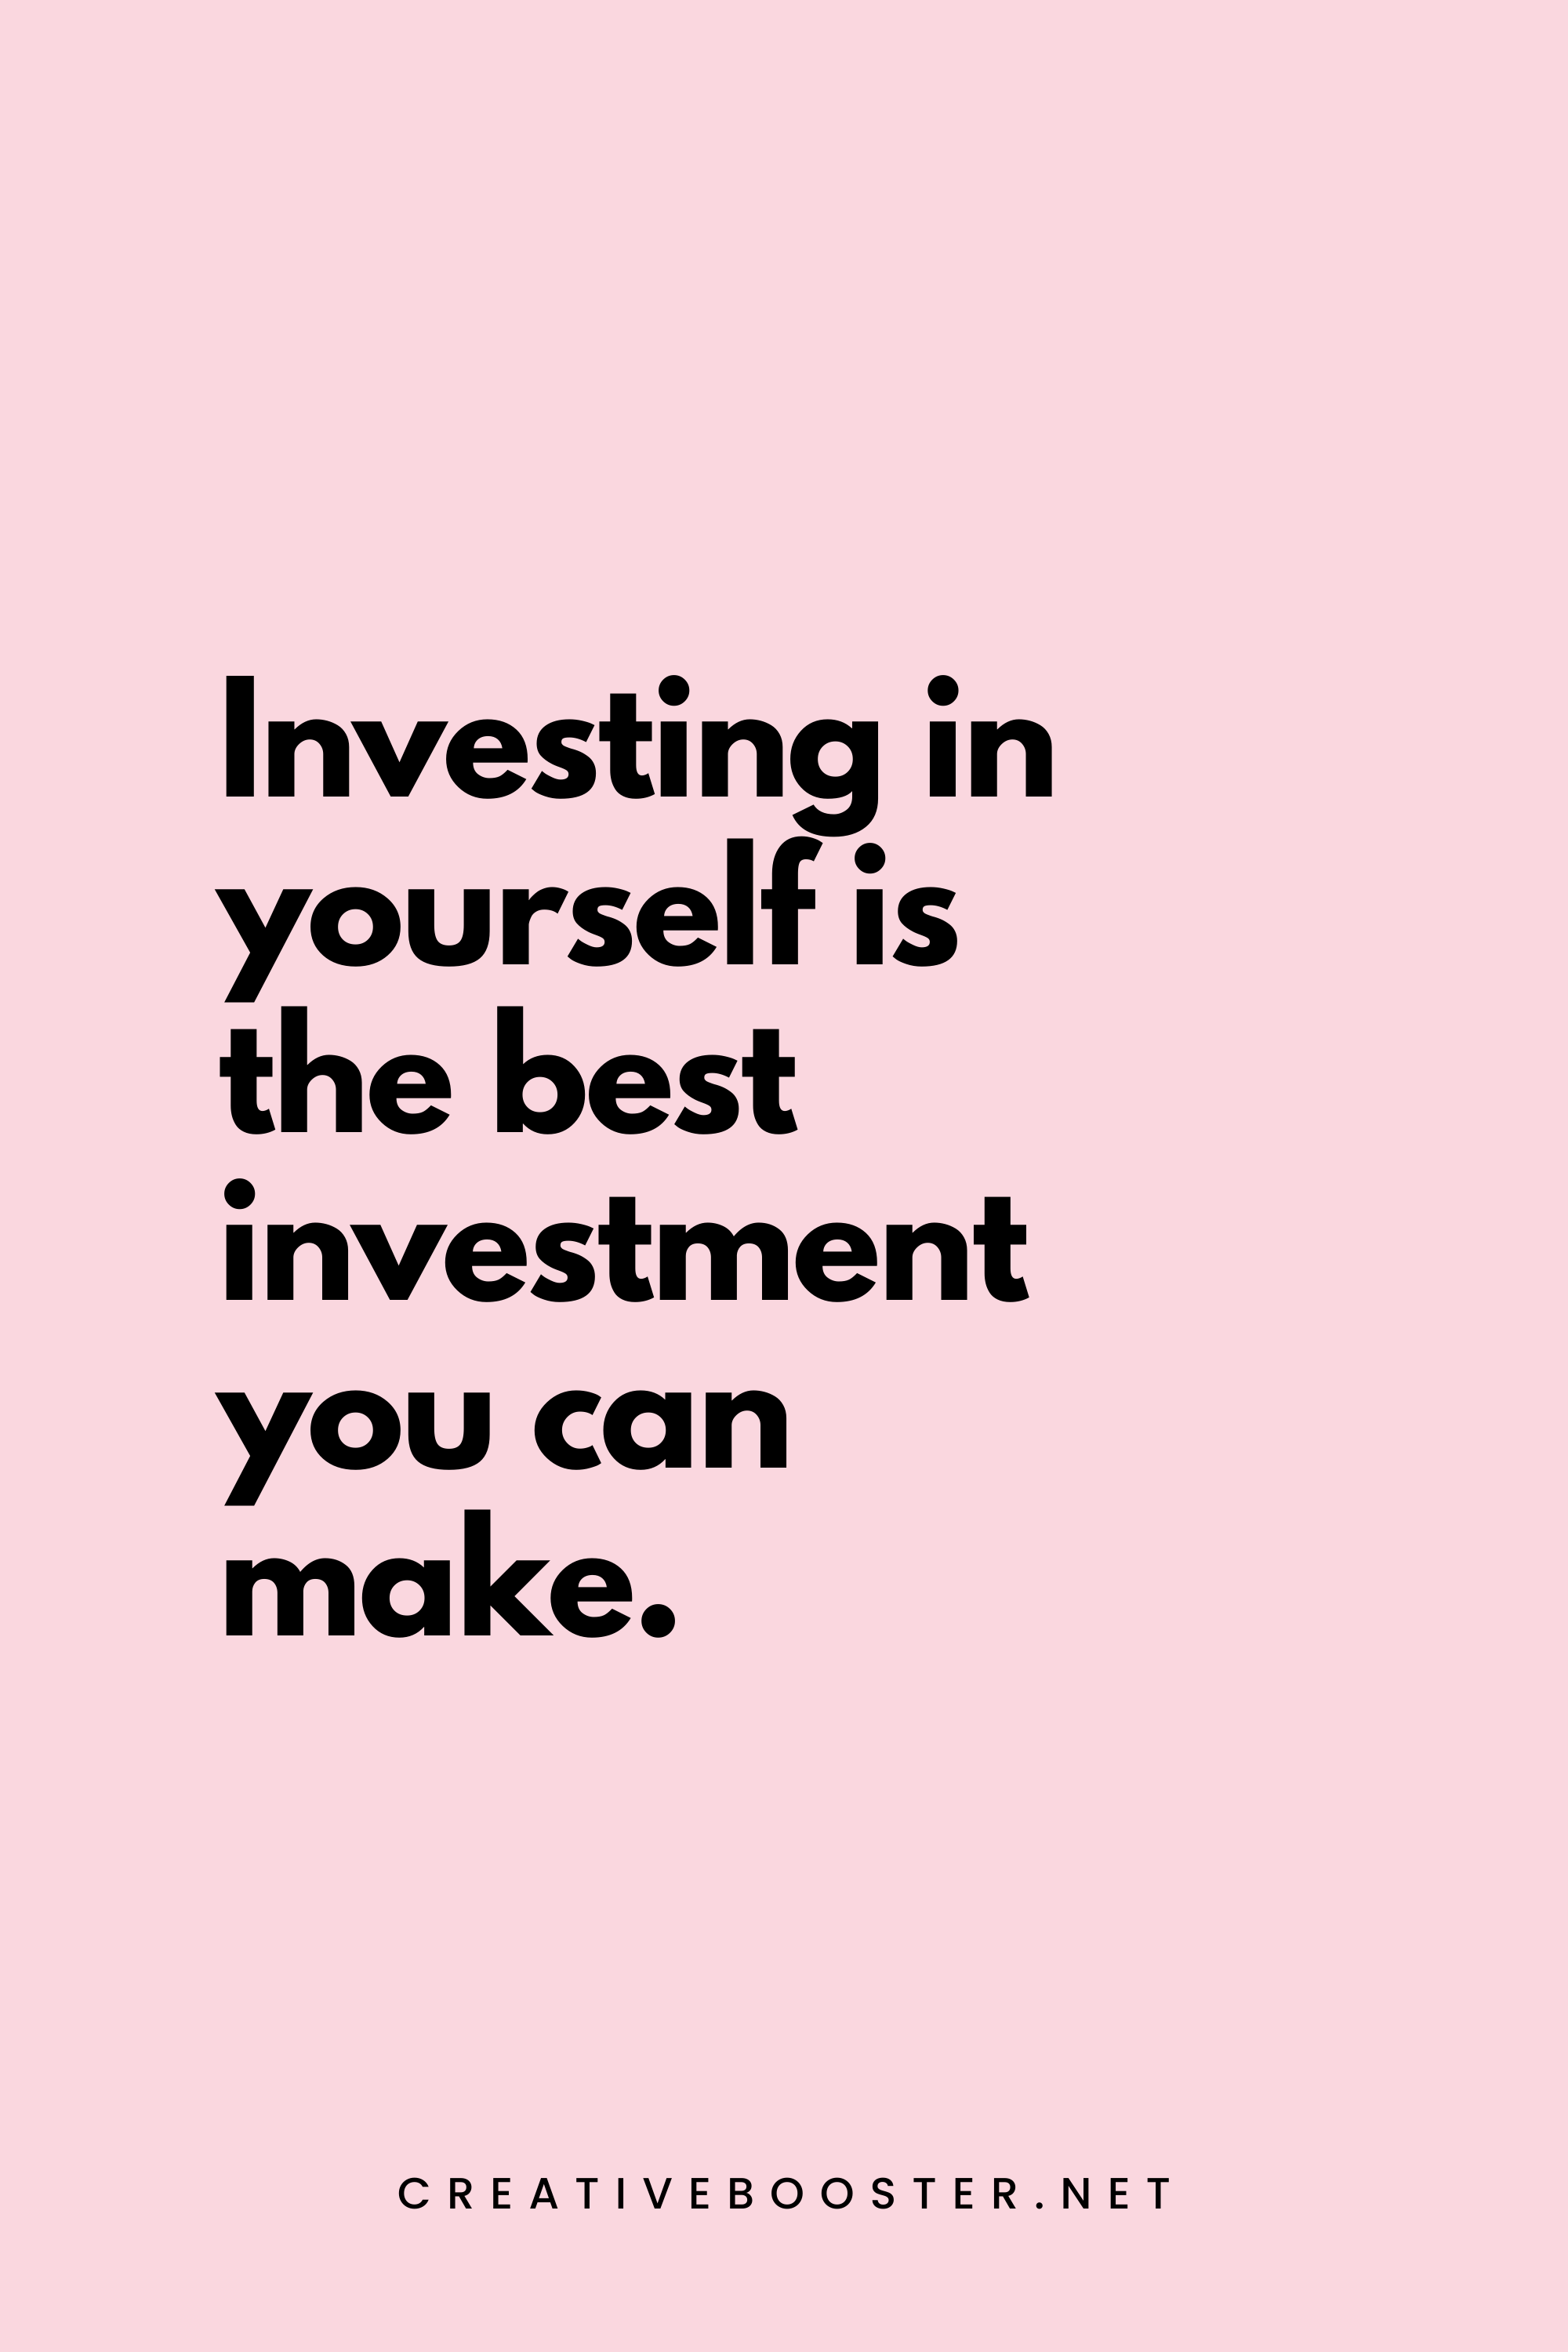 38. Investing in yourself is the best investment you can make. - Oprah Winfrey - 4. Financial Freedom Quotes for Women